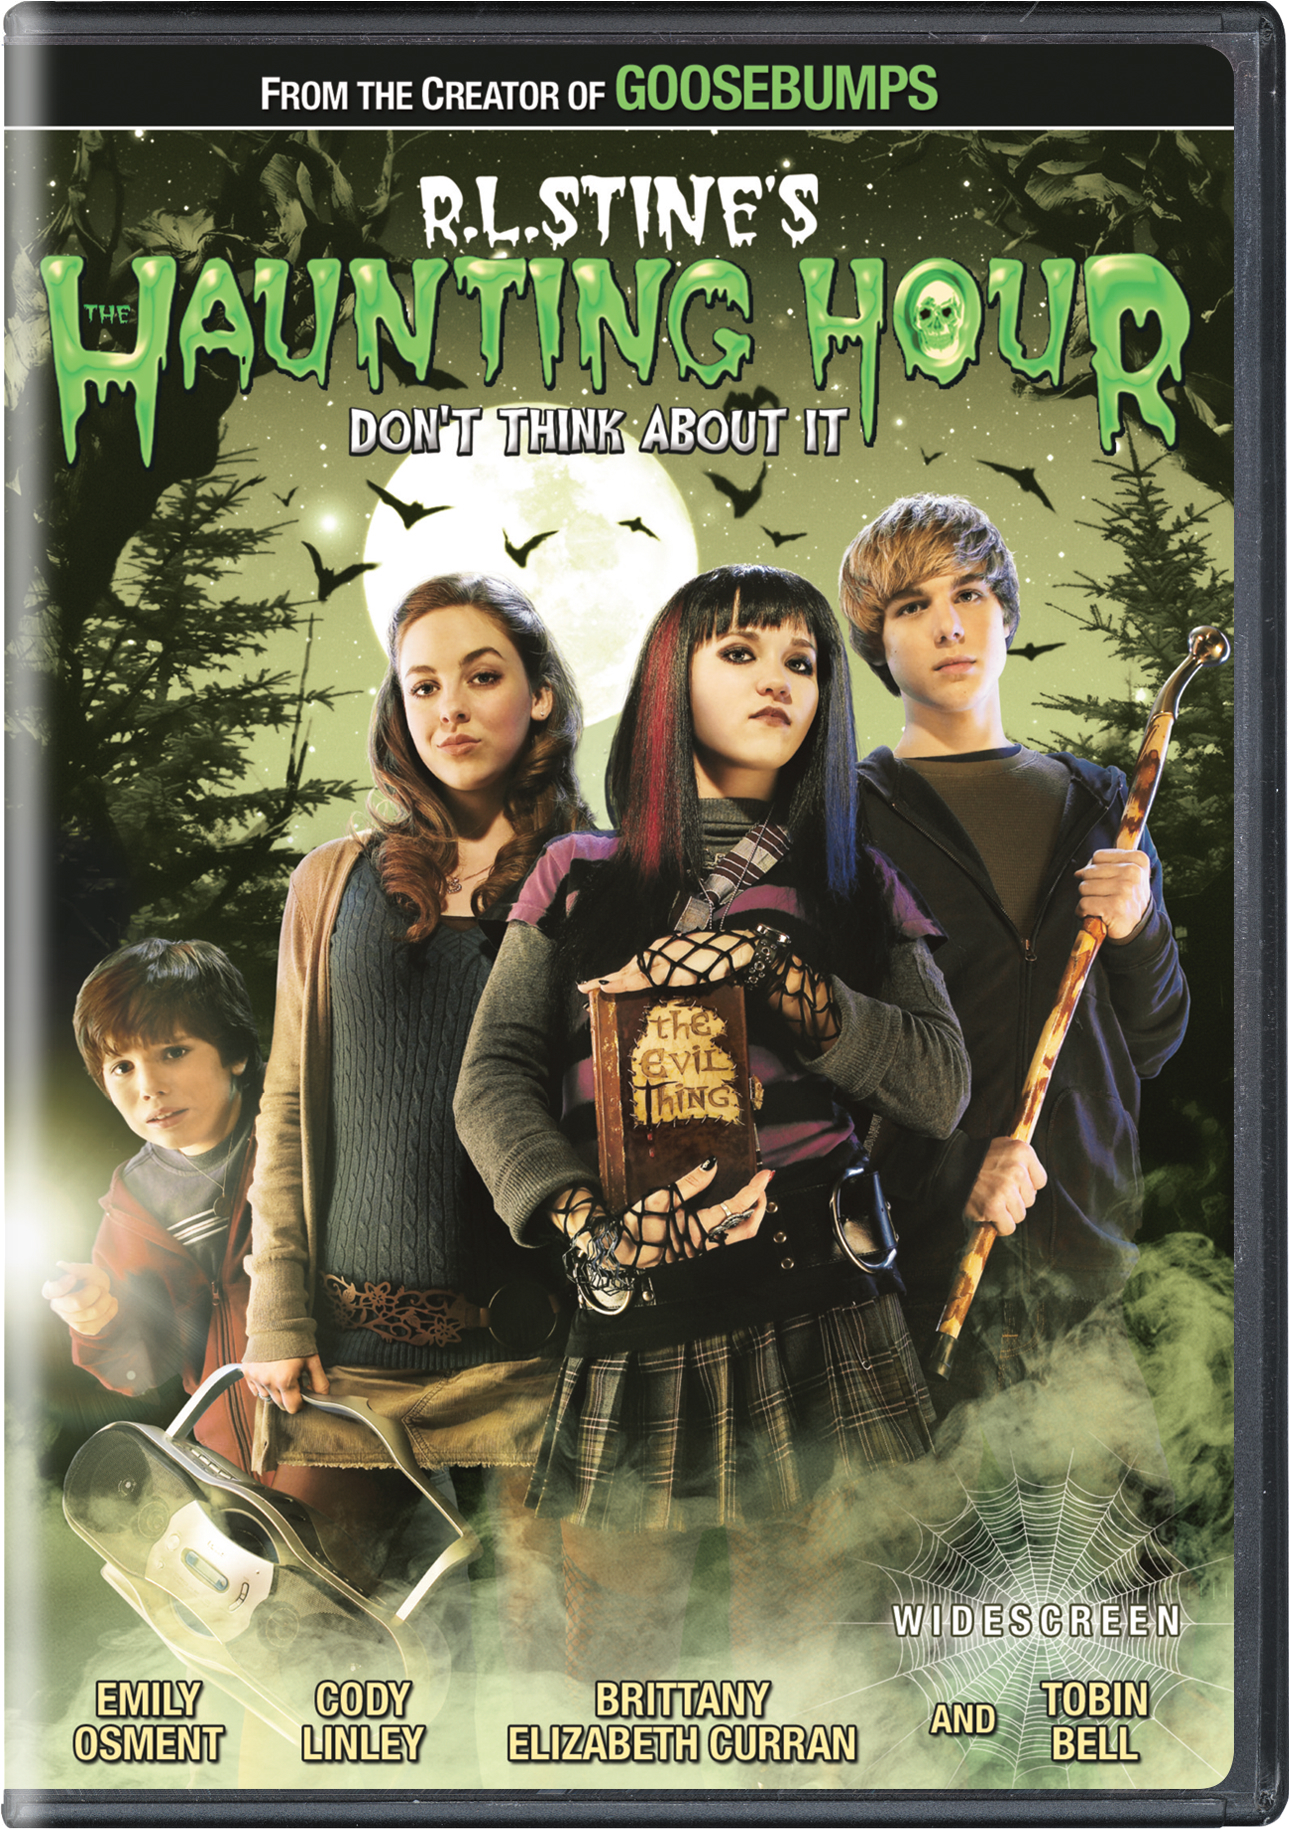 R.L. Stine's The Haunting Hour: Don't Think About It (DVD Widescreen) - DVD [ 2007 ]  - Adventure Movies On DVD - Movies On GRUV